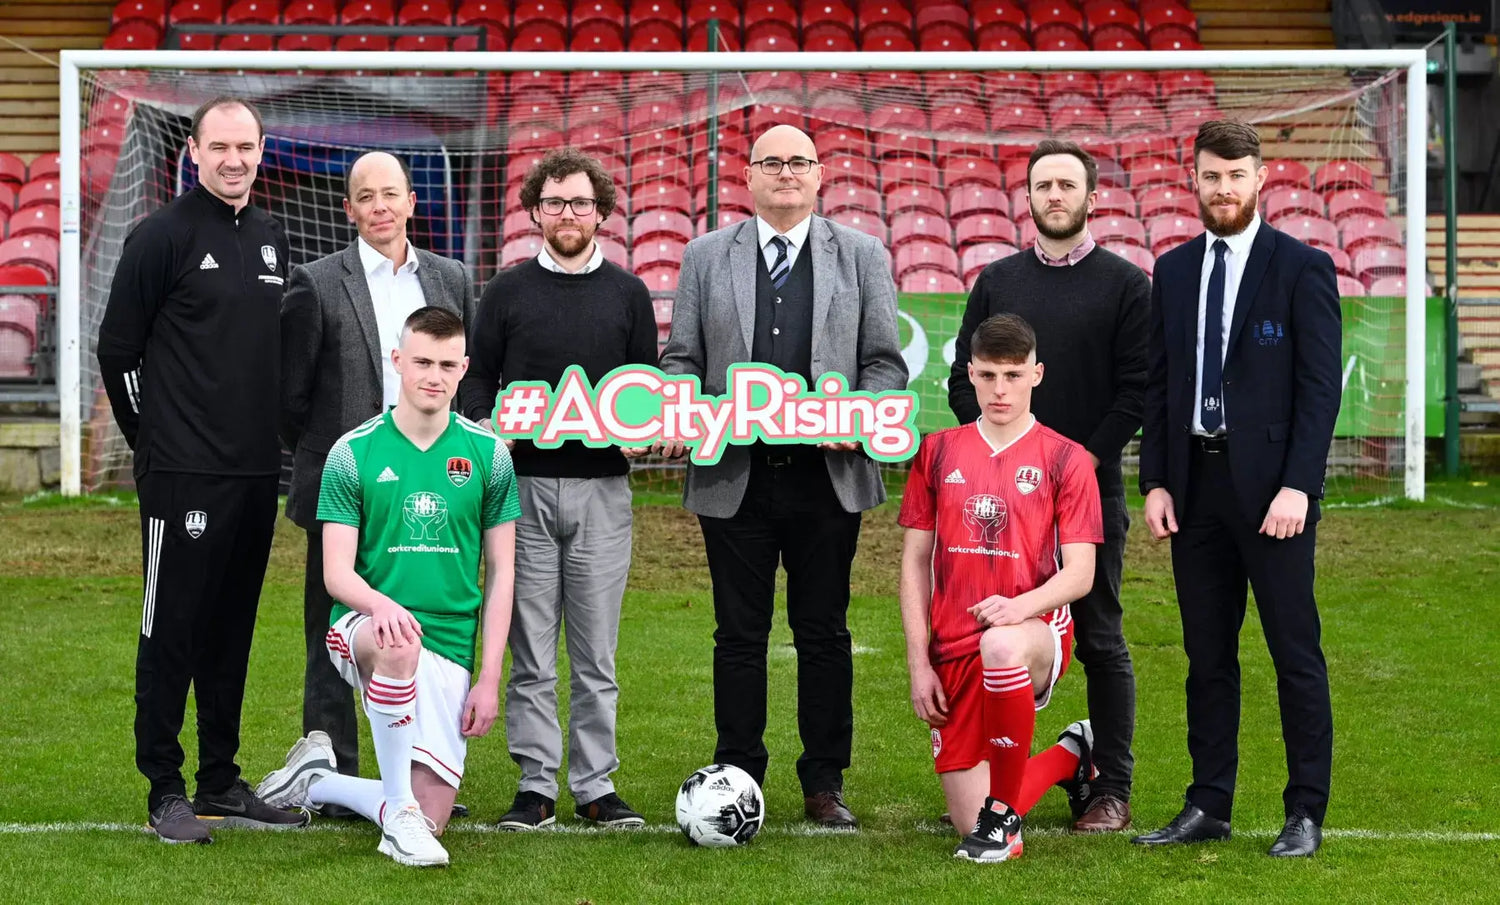 Cork City FC and Cork Credit Unions announce three-year academy partnership.